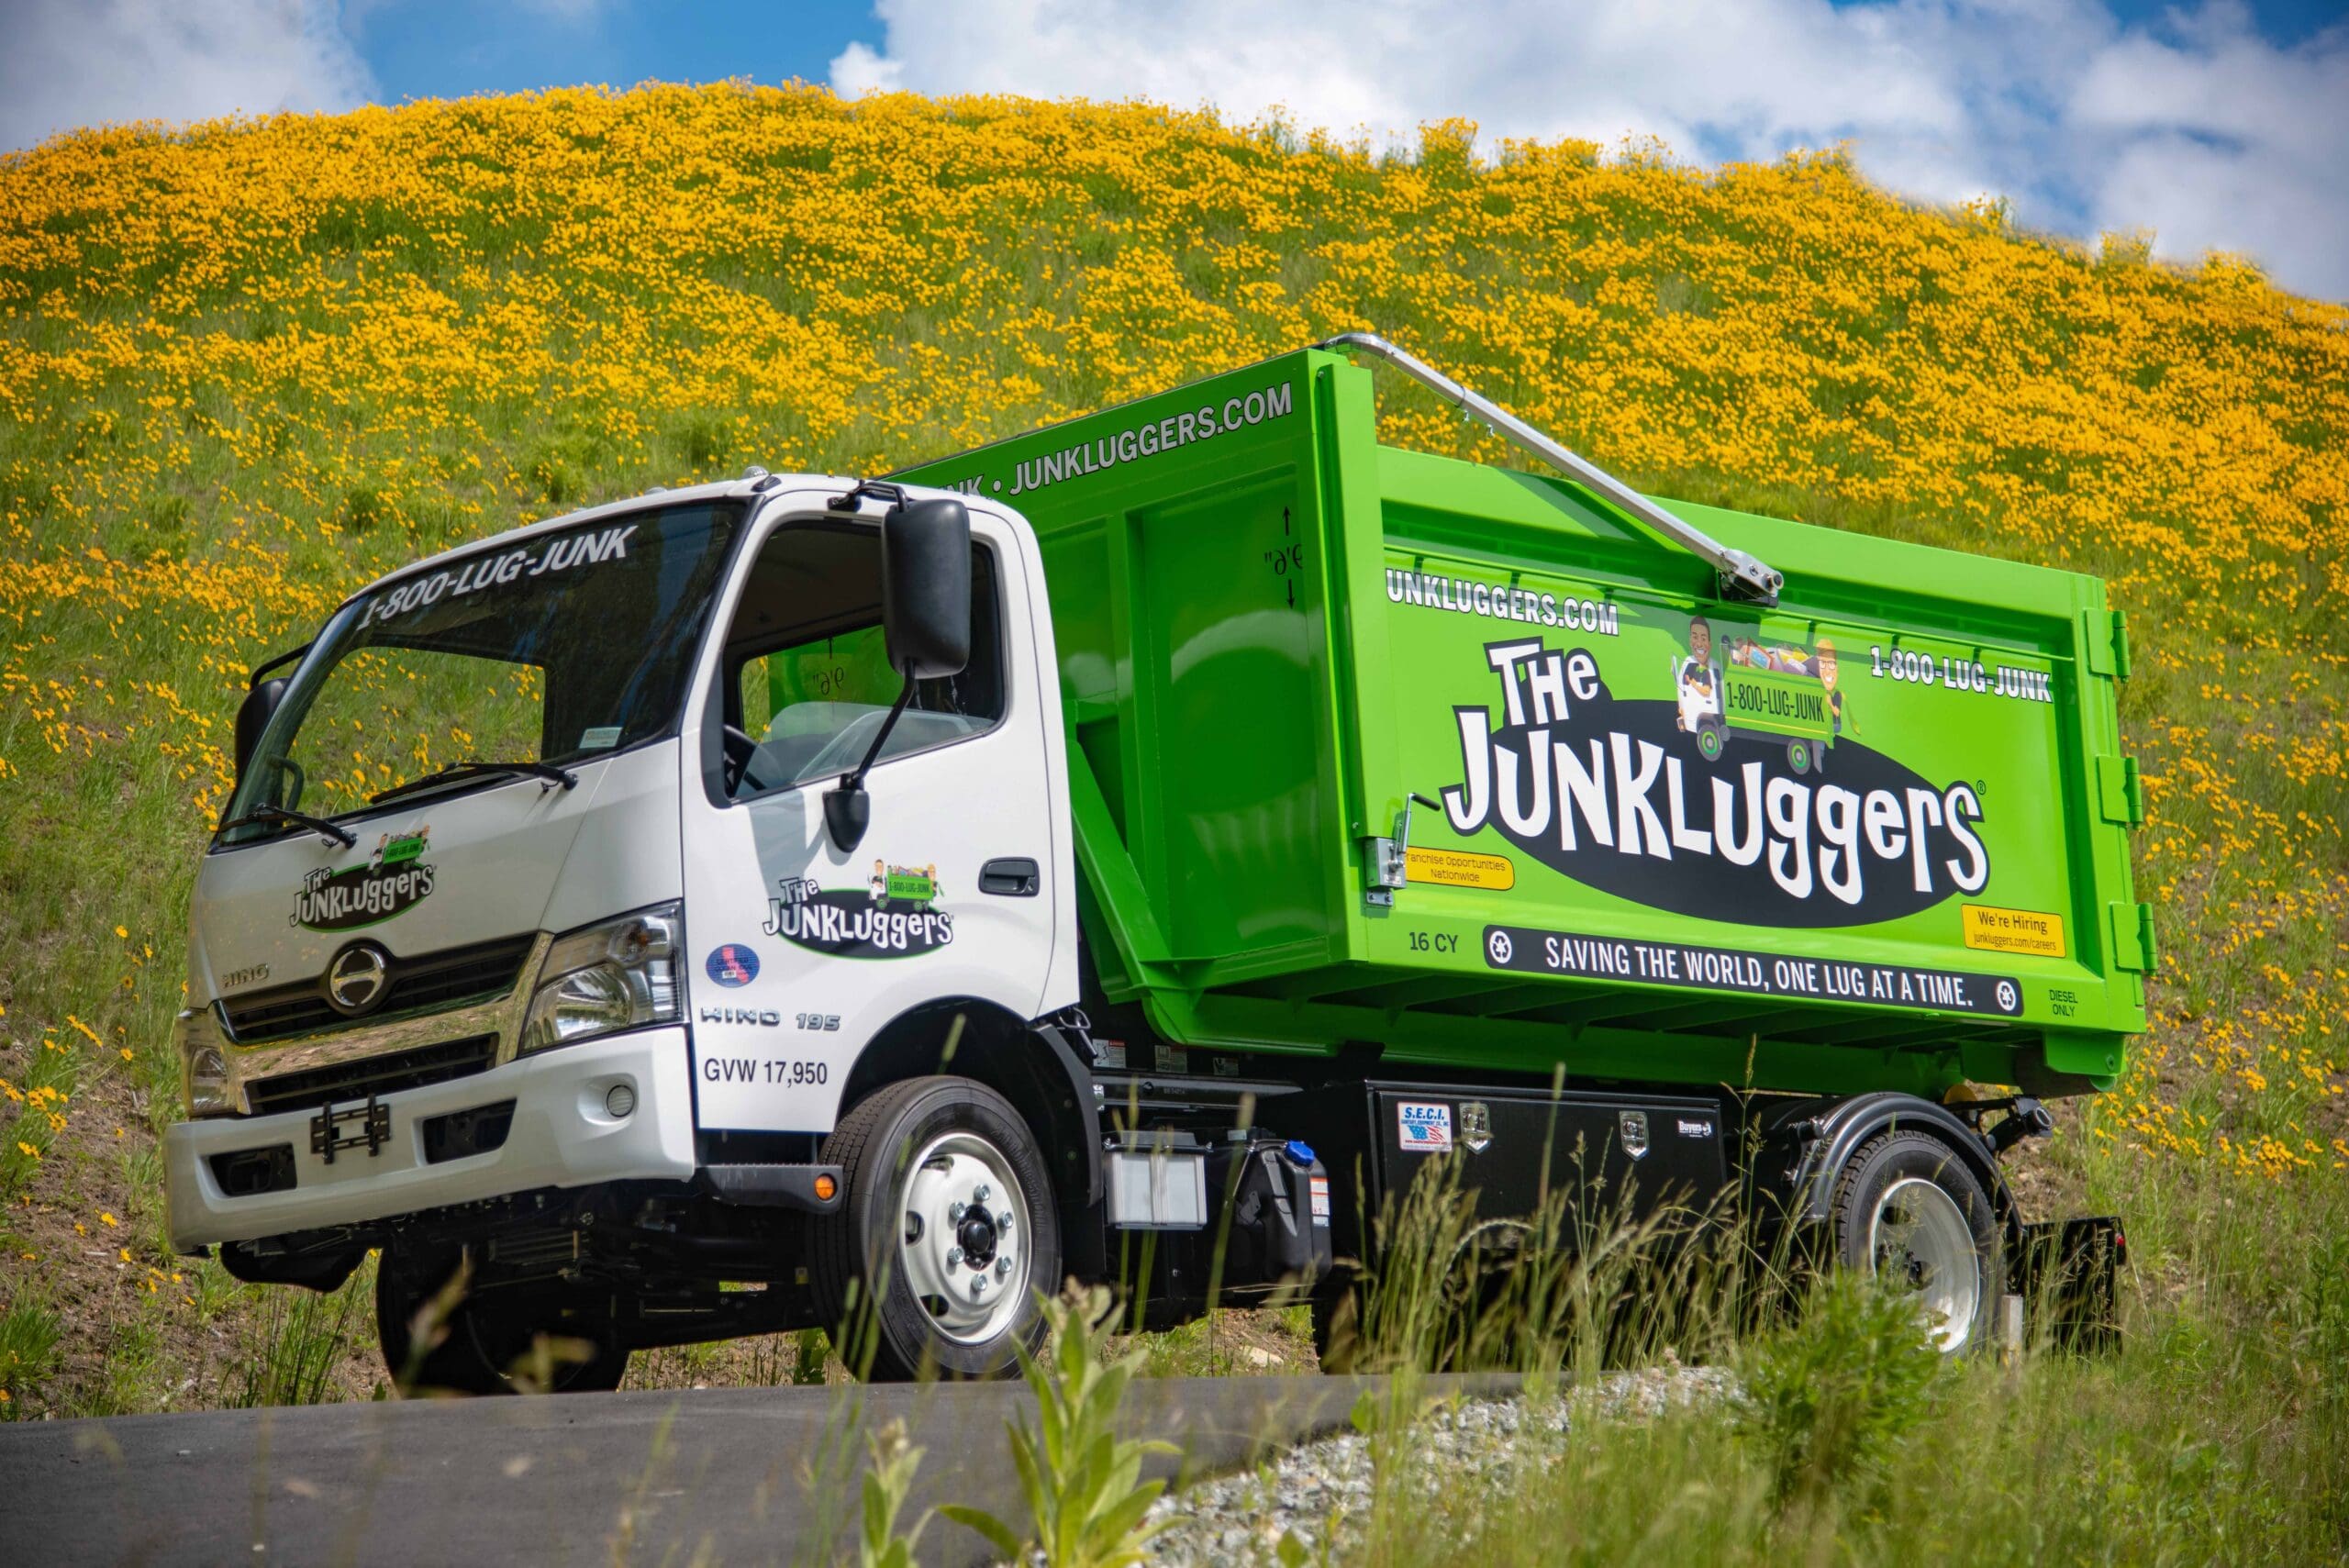 A large green truck in front of a field of yellow flowers